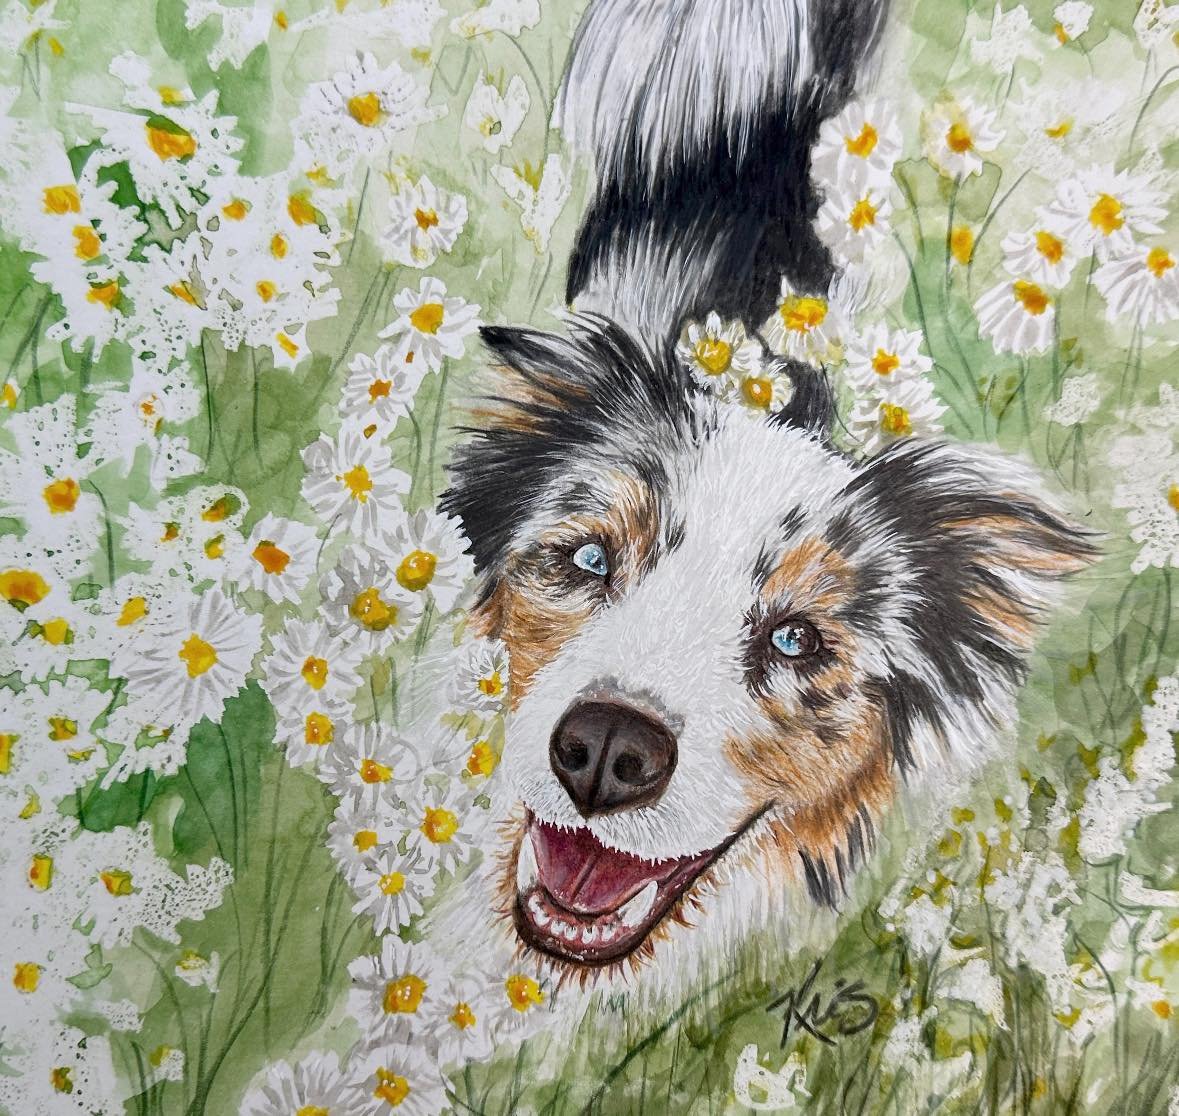 Today is National Pet Day!! 🐾💜Have you ever thought about getting a pet portrait?? 

🐶&hearts;️Just think how you would be able to share the portrait to showcase your pet's cuteness and personality without showing a regular photo like everyone els